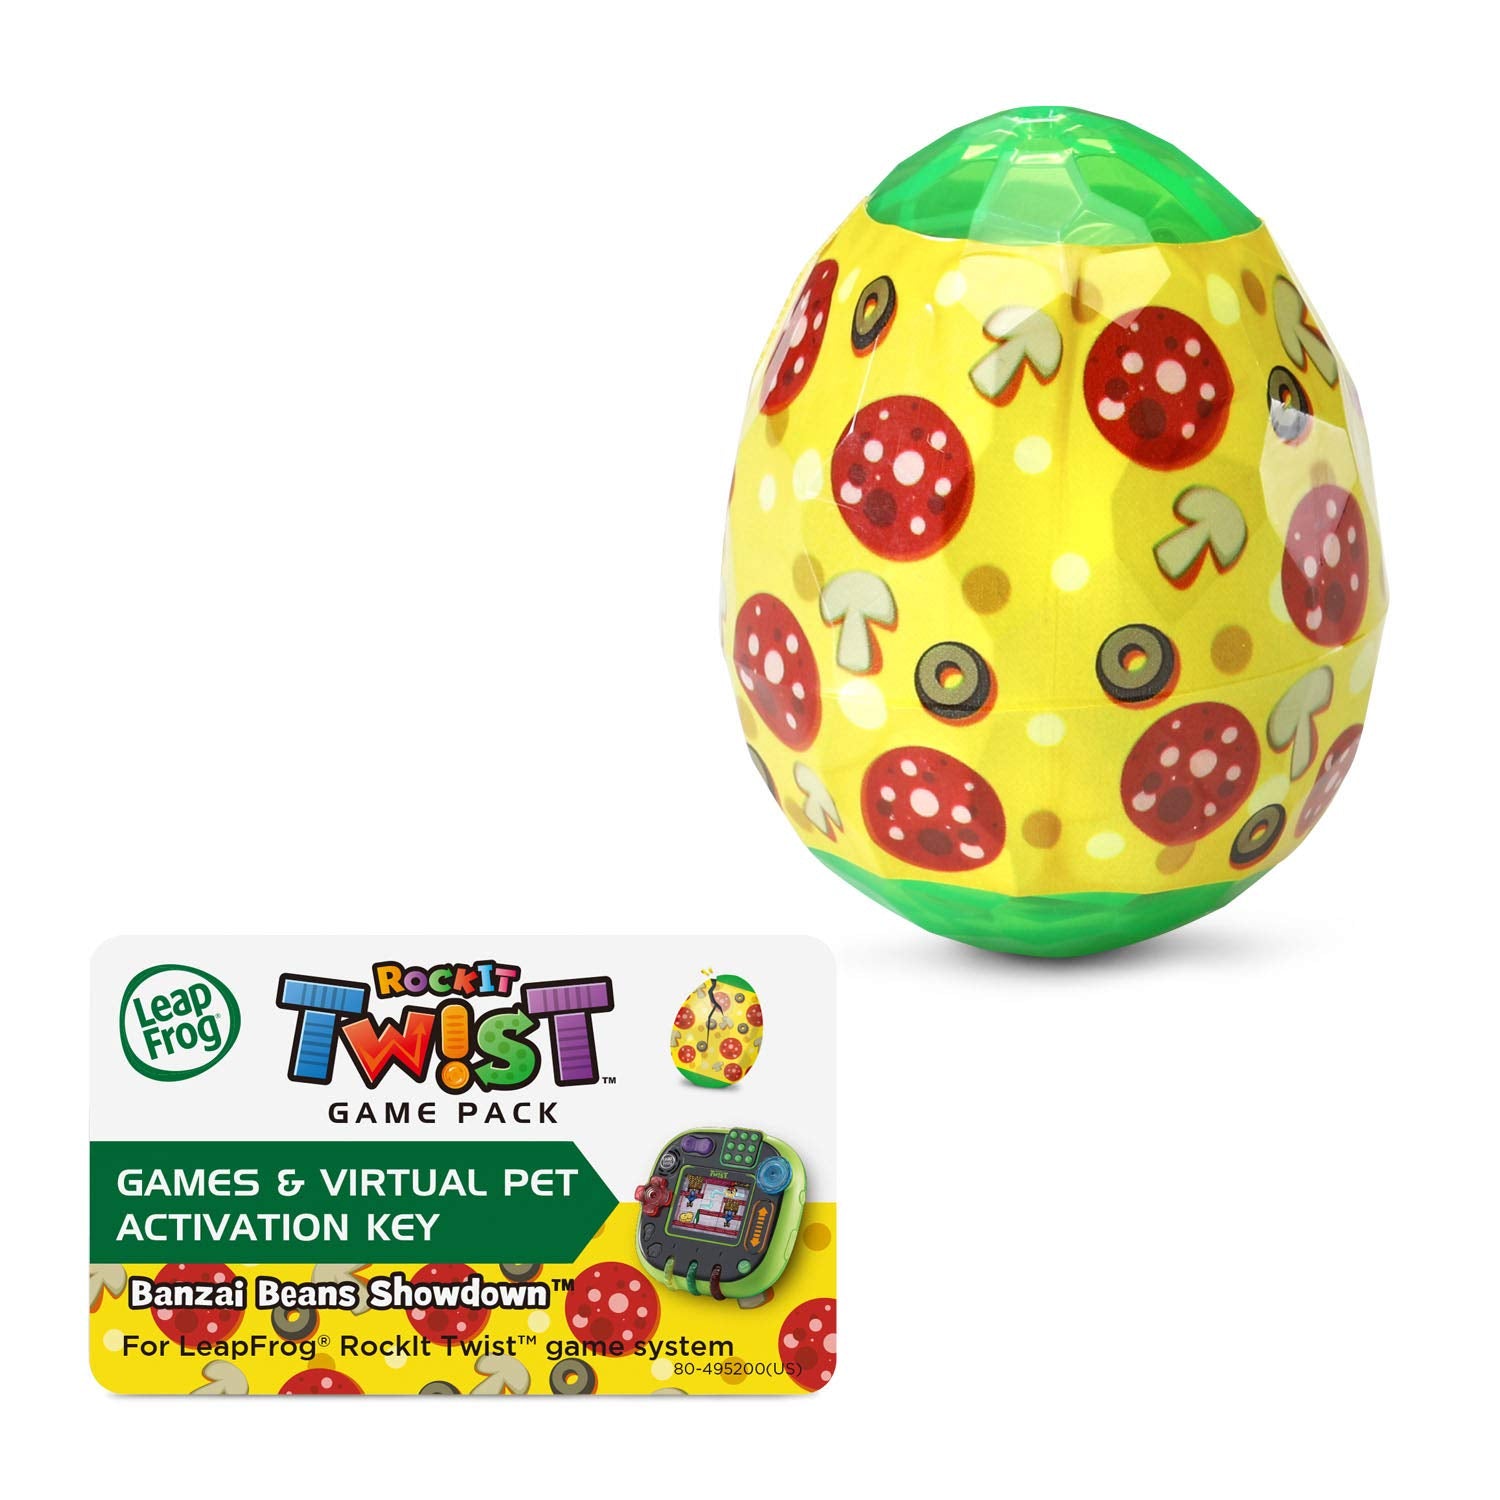 LeapFrog RockIt Twist Game Pack from $2.71 on